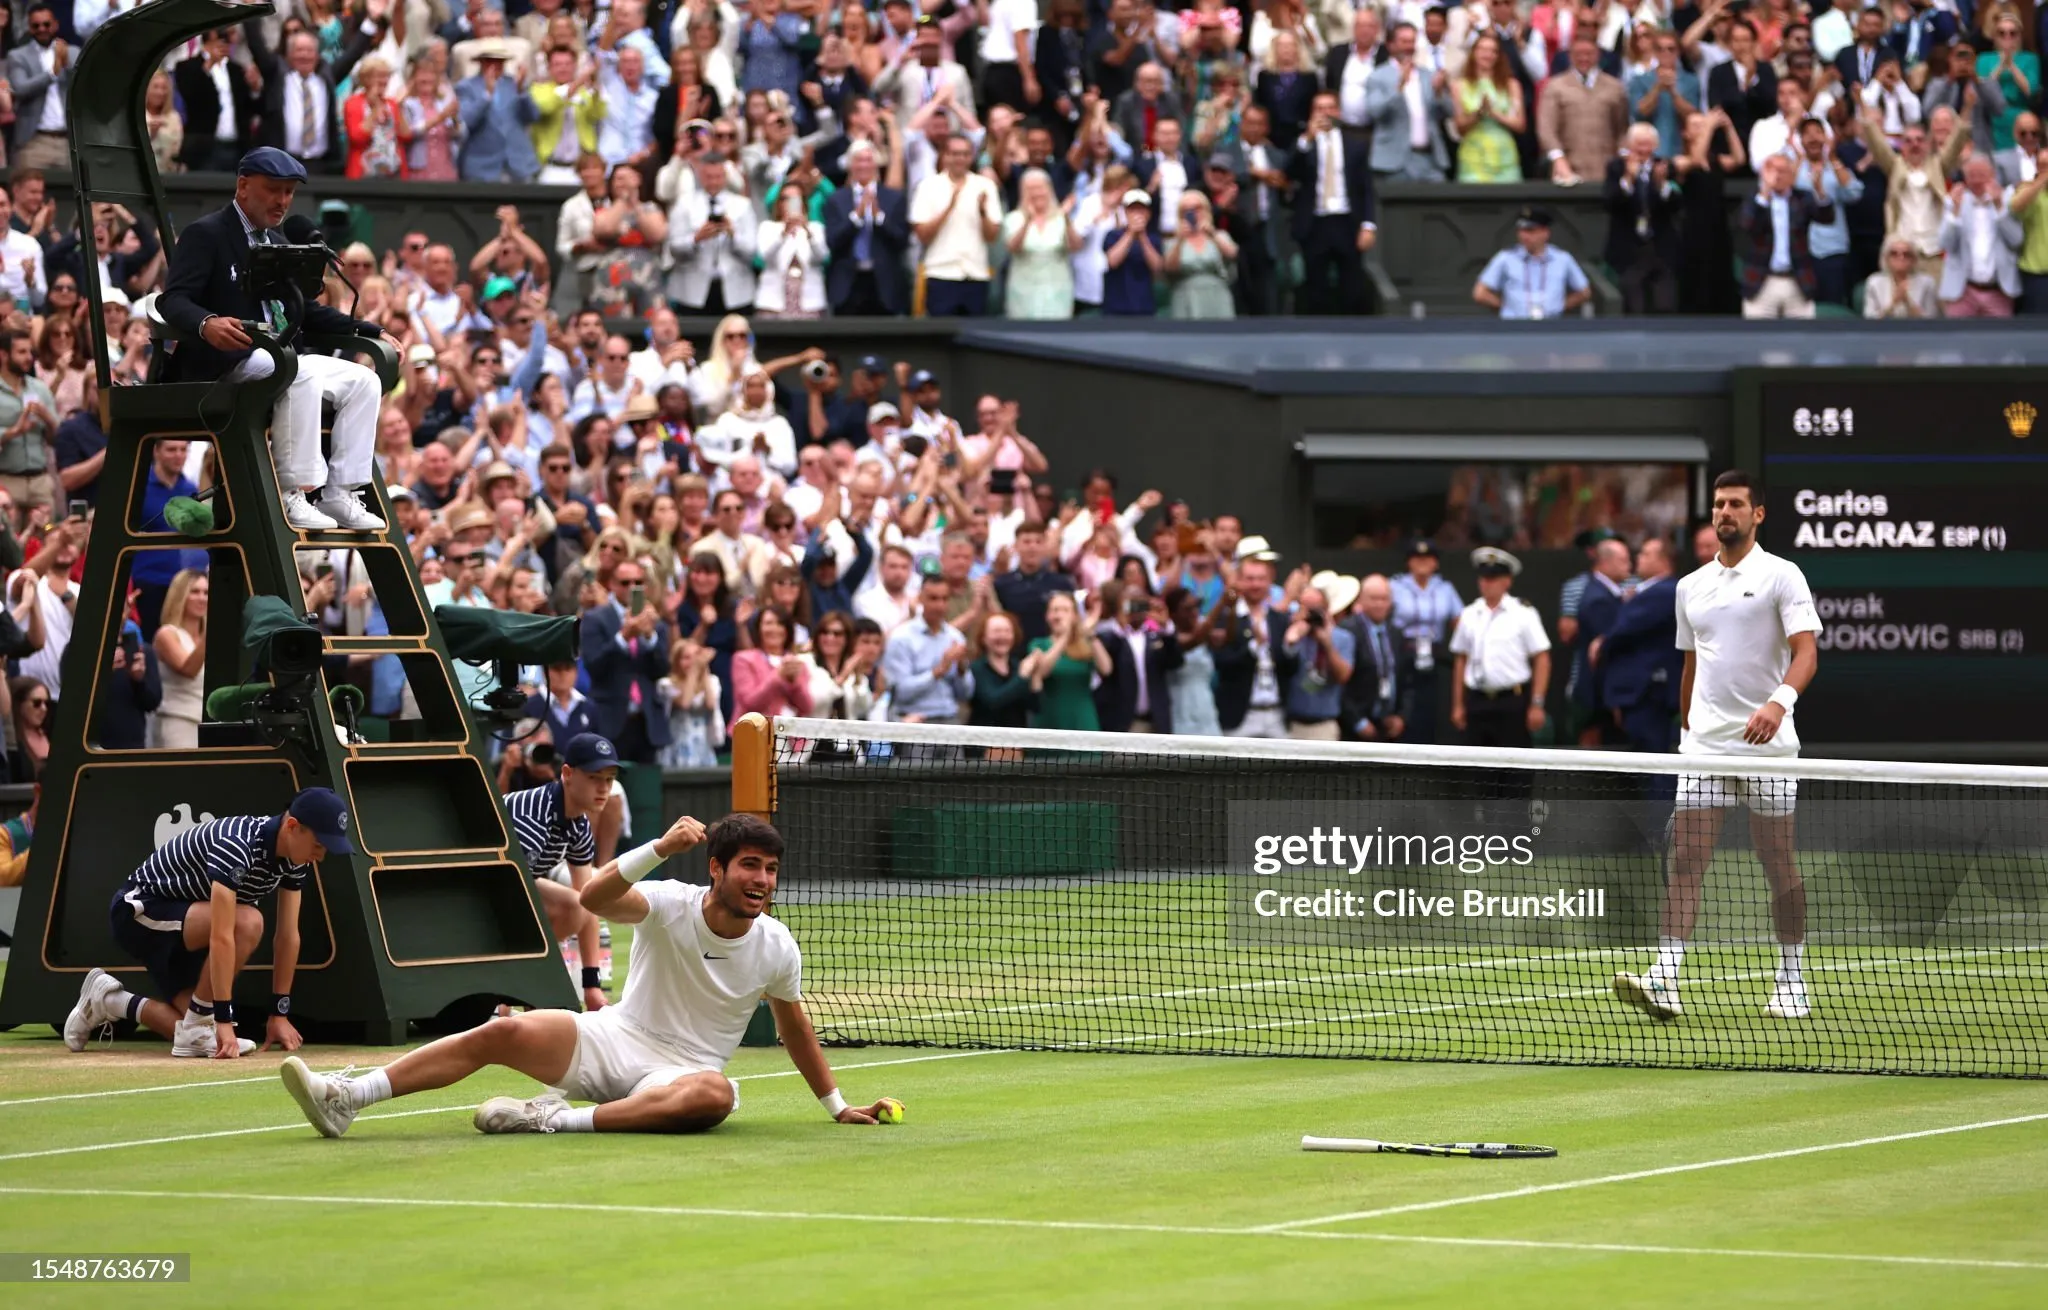 Carlos Alcaraz of Spain celebrates winning Championship point in the Men's Singles Final against Novak Djokovic of Serbia on day fourteen of The Championships Wimbledon 2023 at All England Lawn Tennis and Croquet Club on July 16, 2023 in London, England.   Photo by Clive Brunskill/Getty Images.